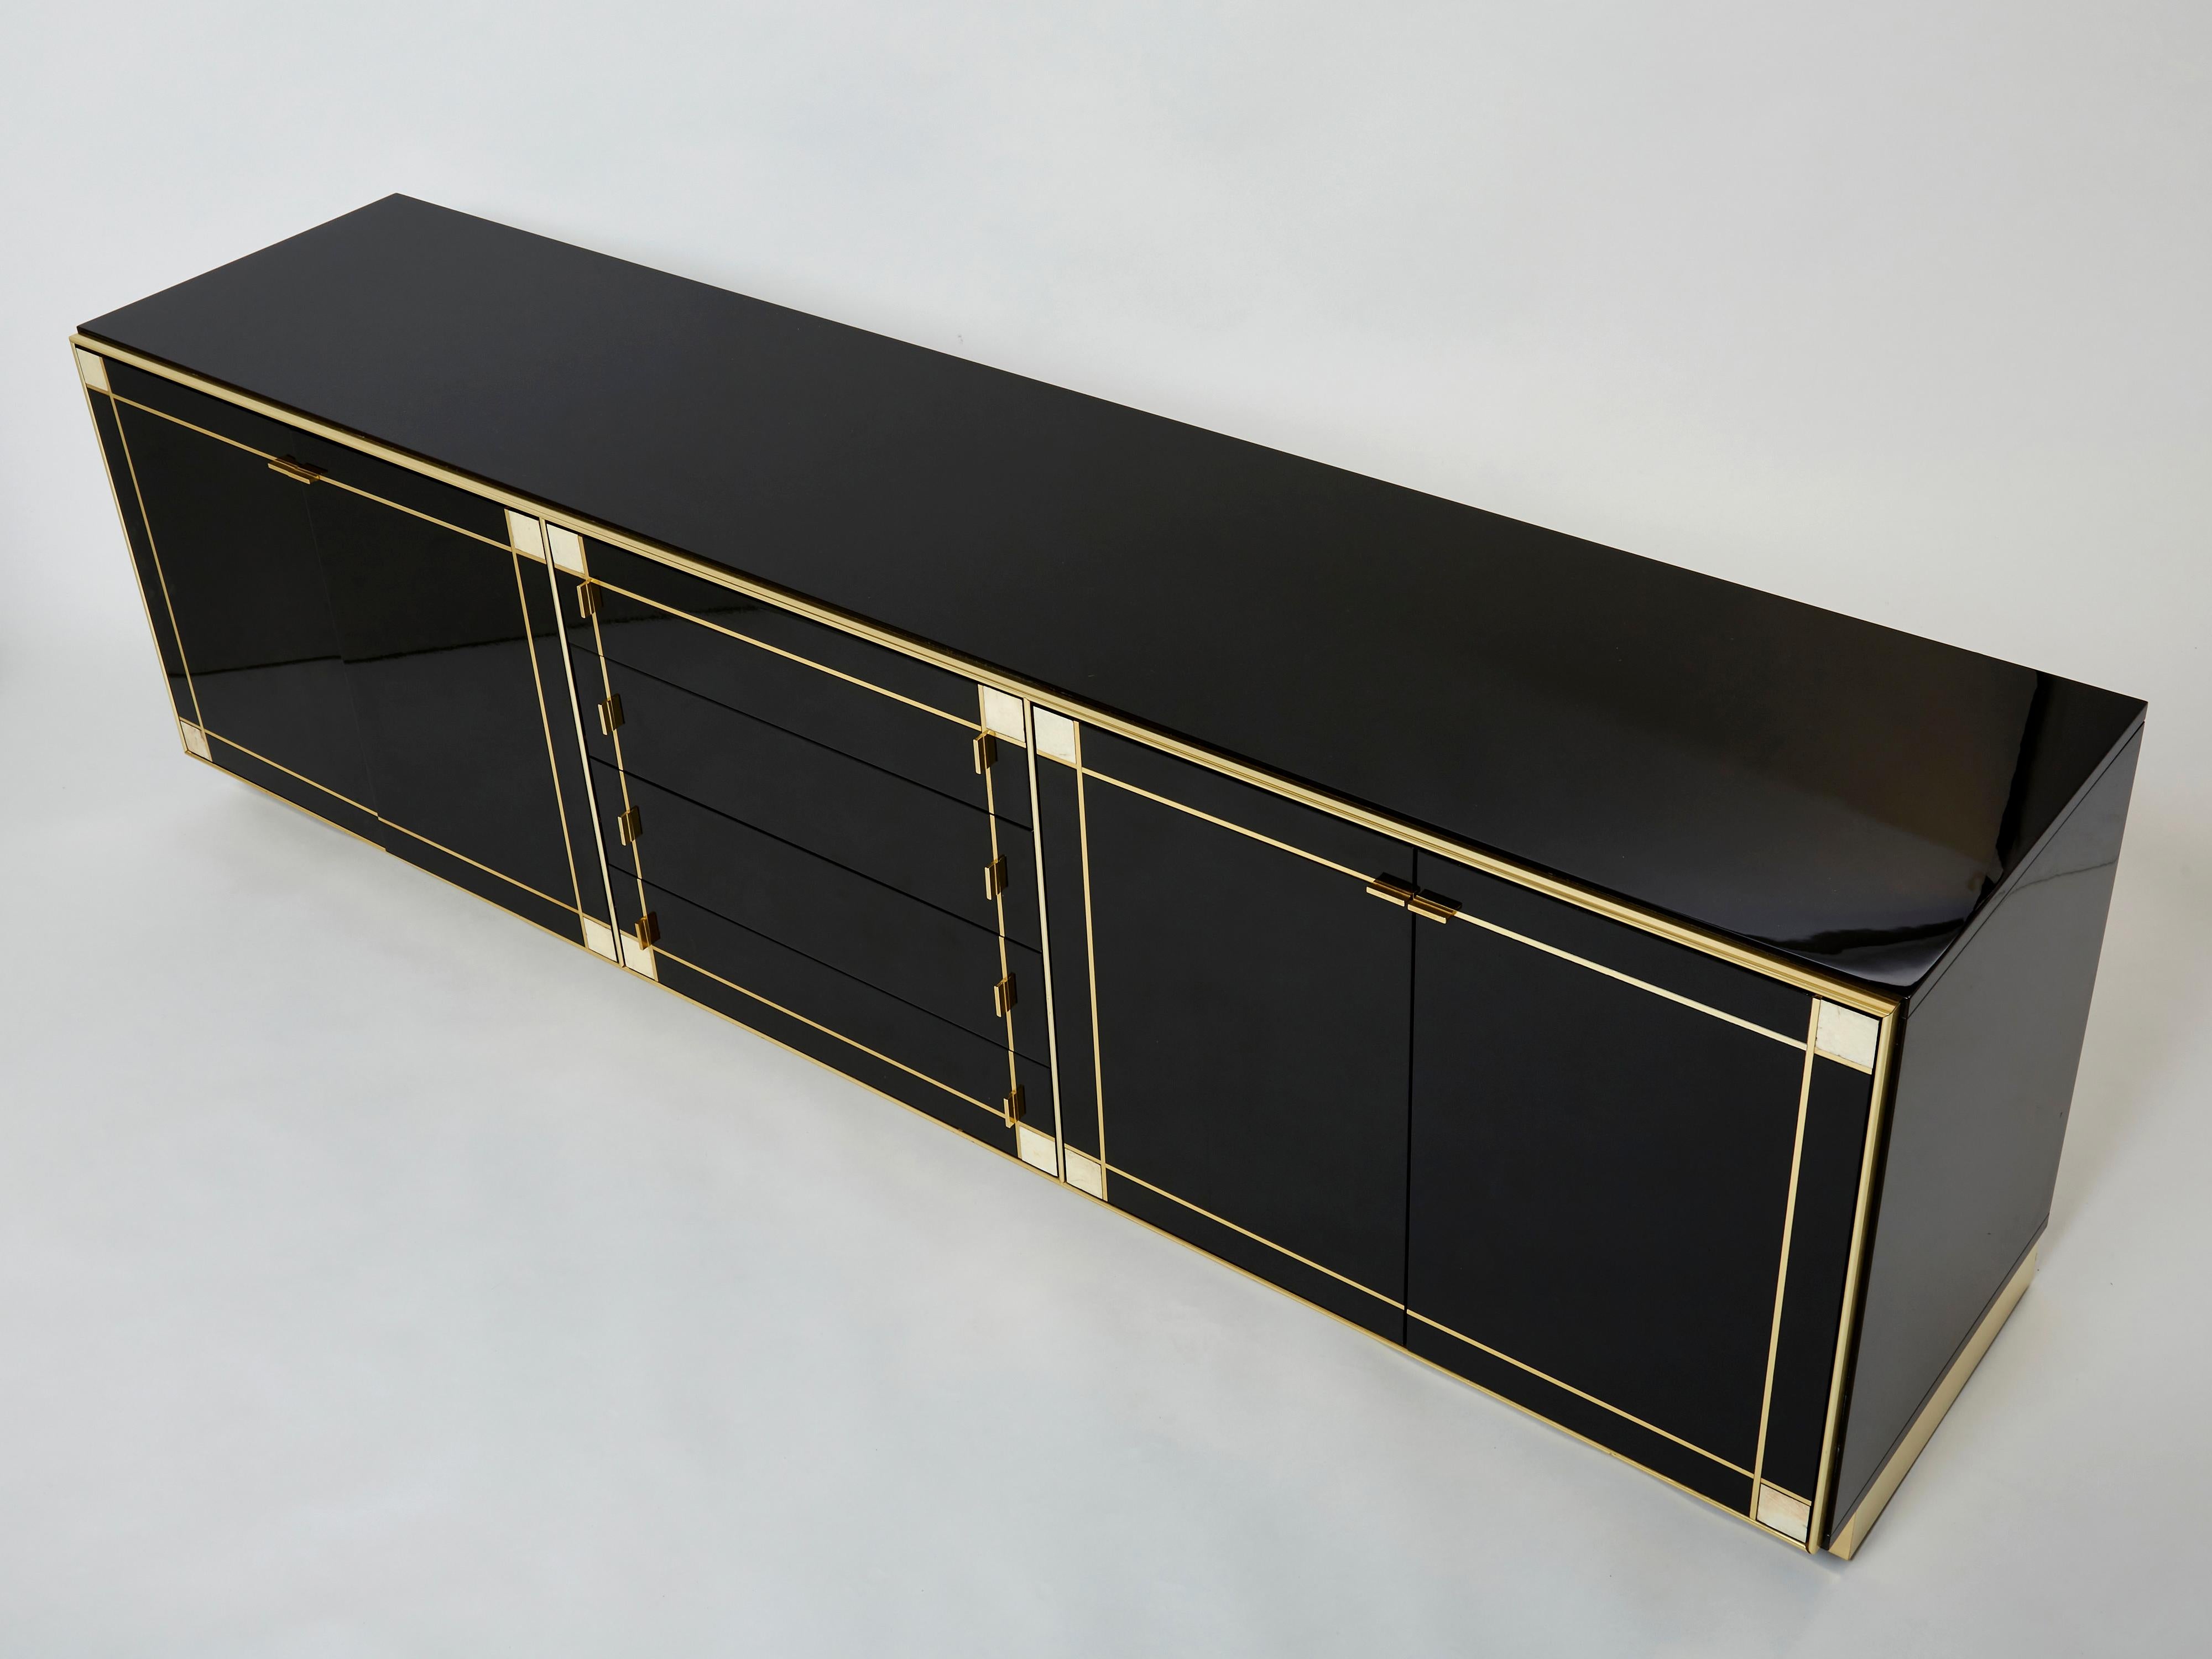 Pierre Cardin Sideboard Brass Black Lacquered Shell Inlays, 1980s For Sale 5